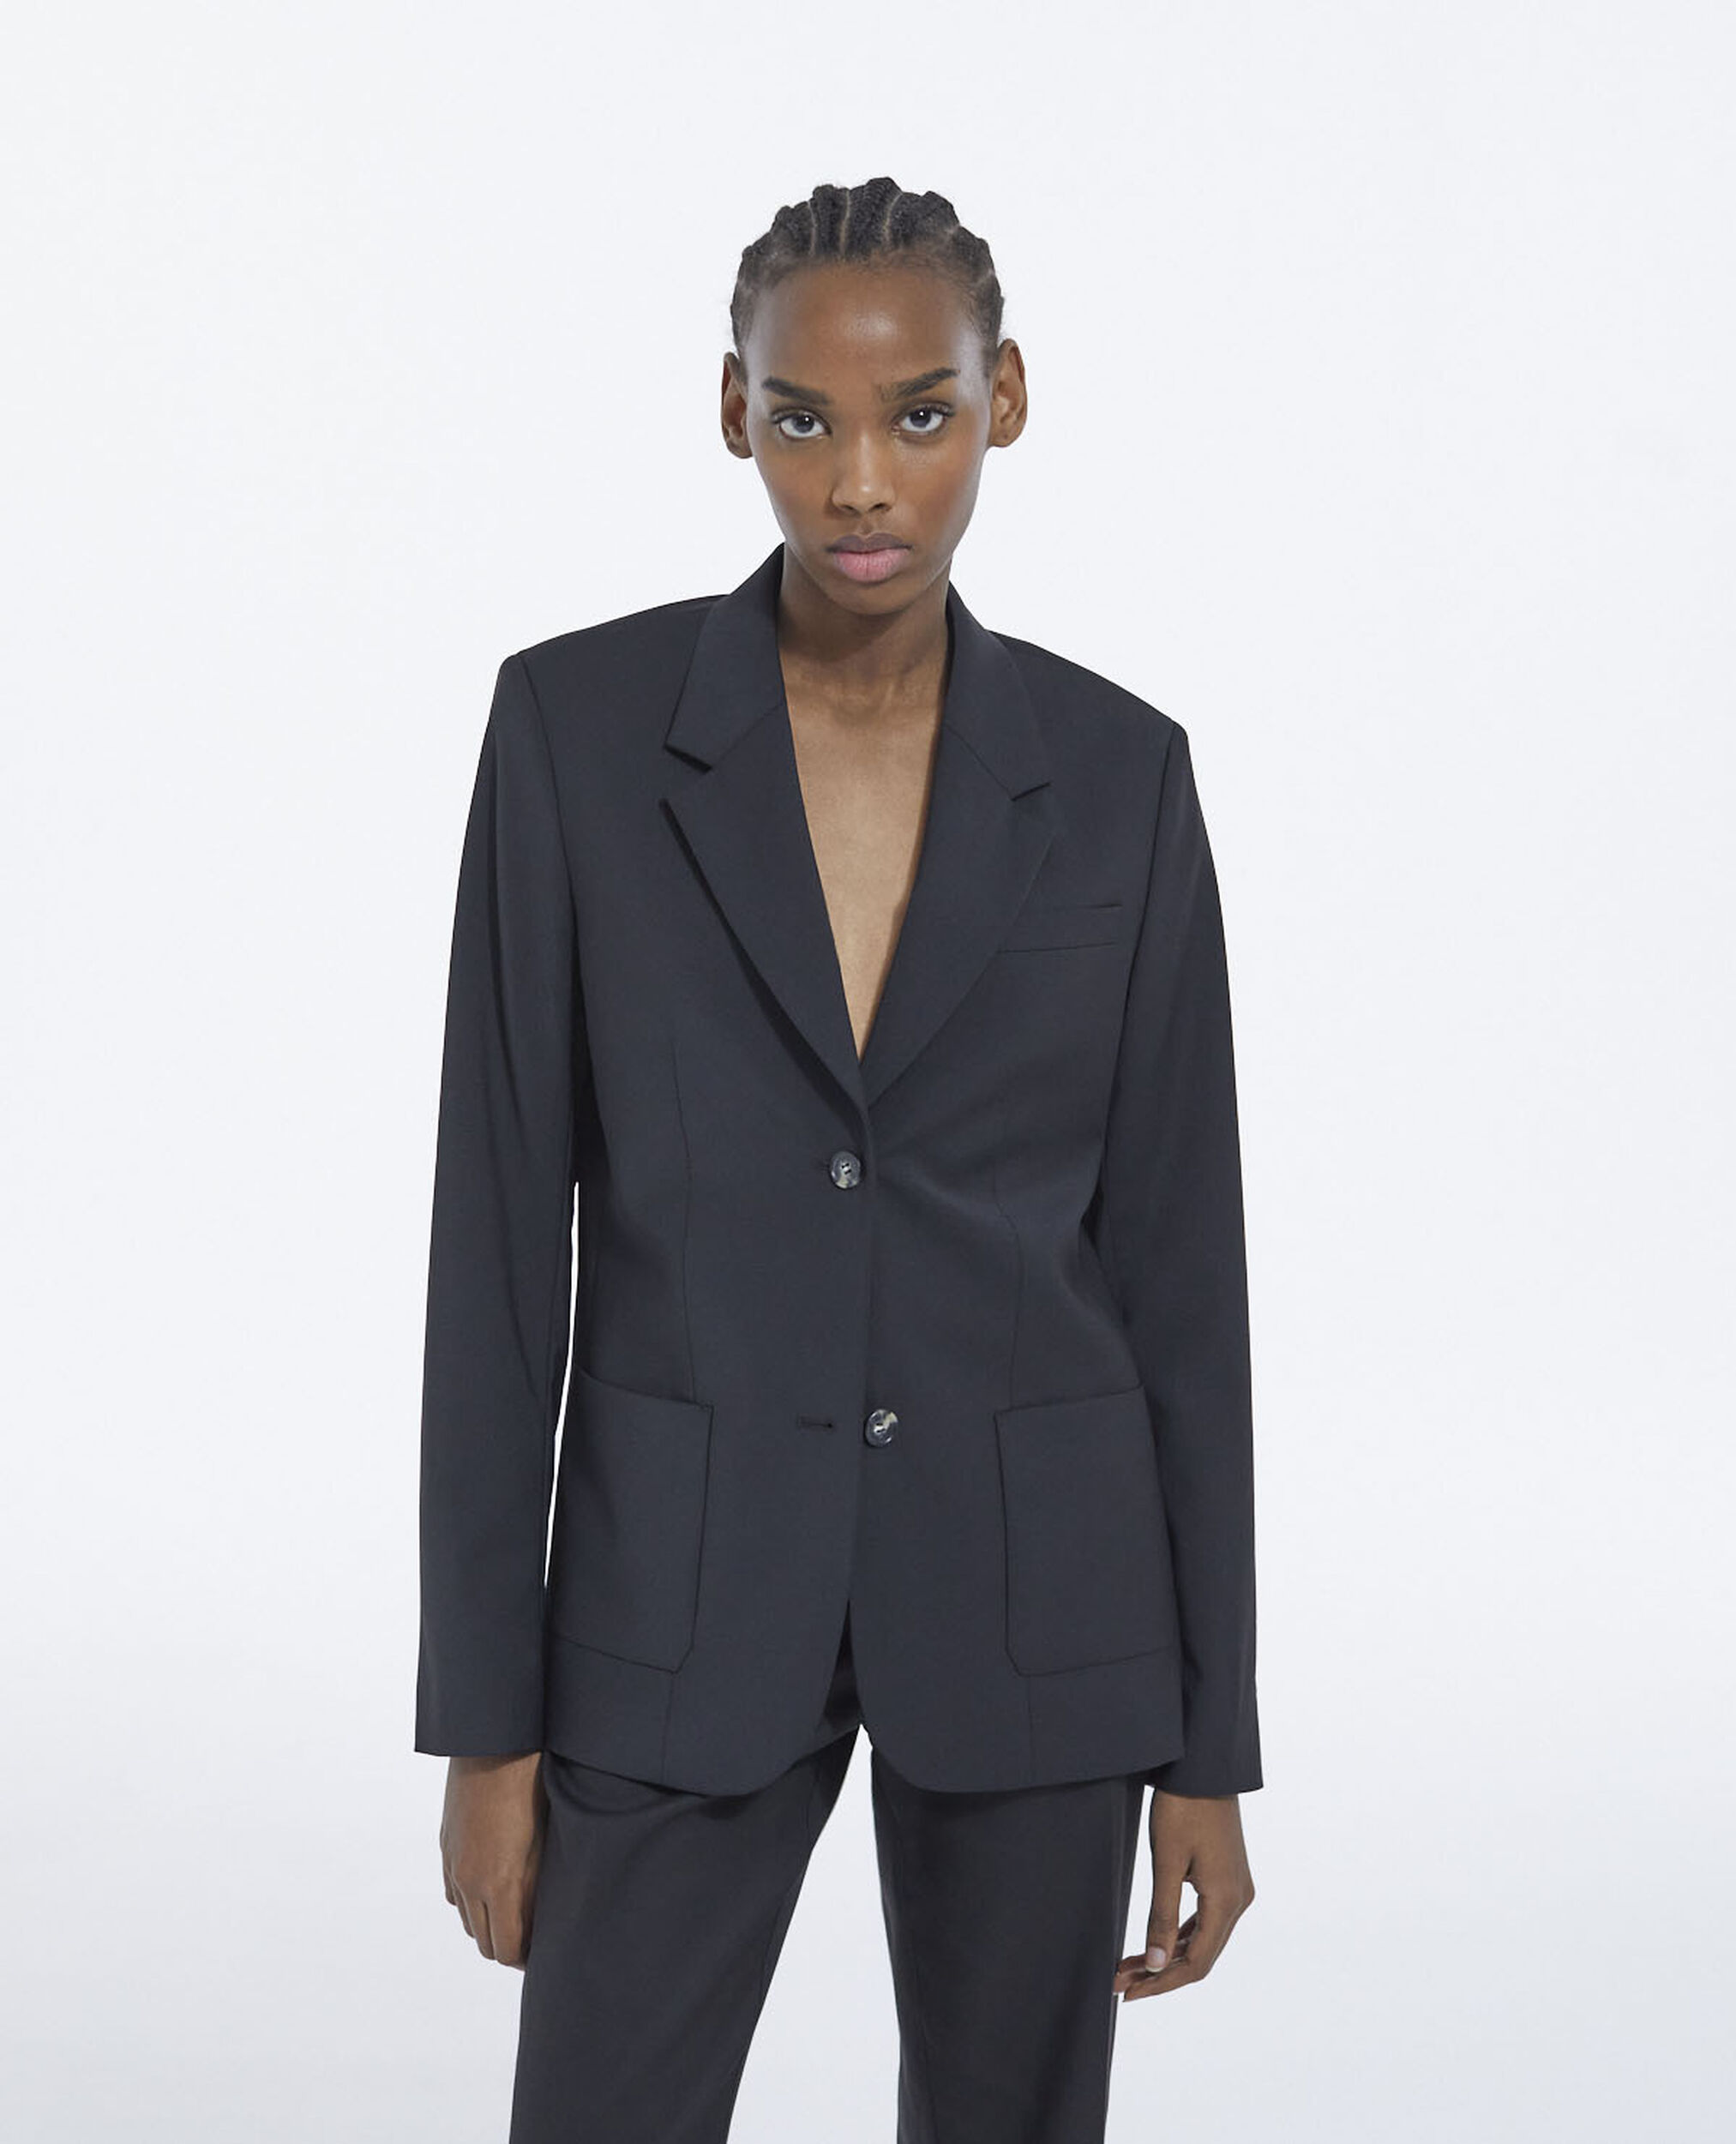 Straight tailored wool jacket, BLACK, hi-res image number null